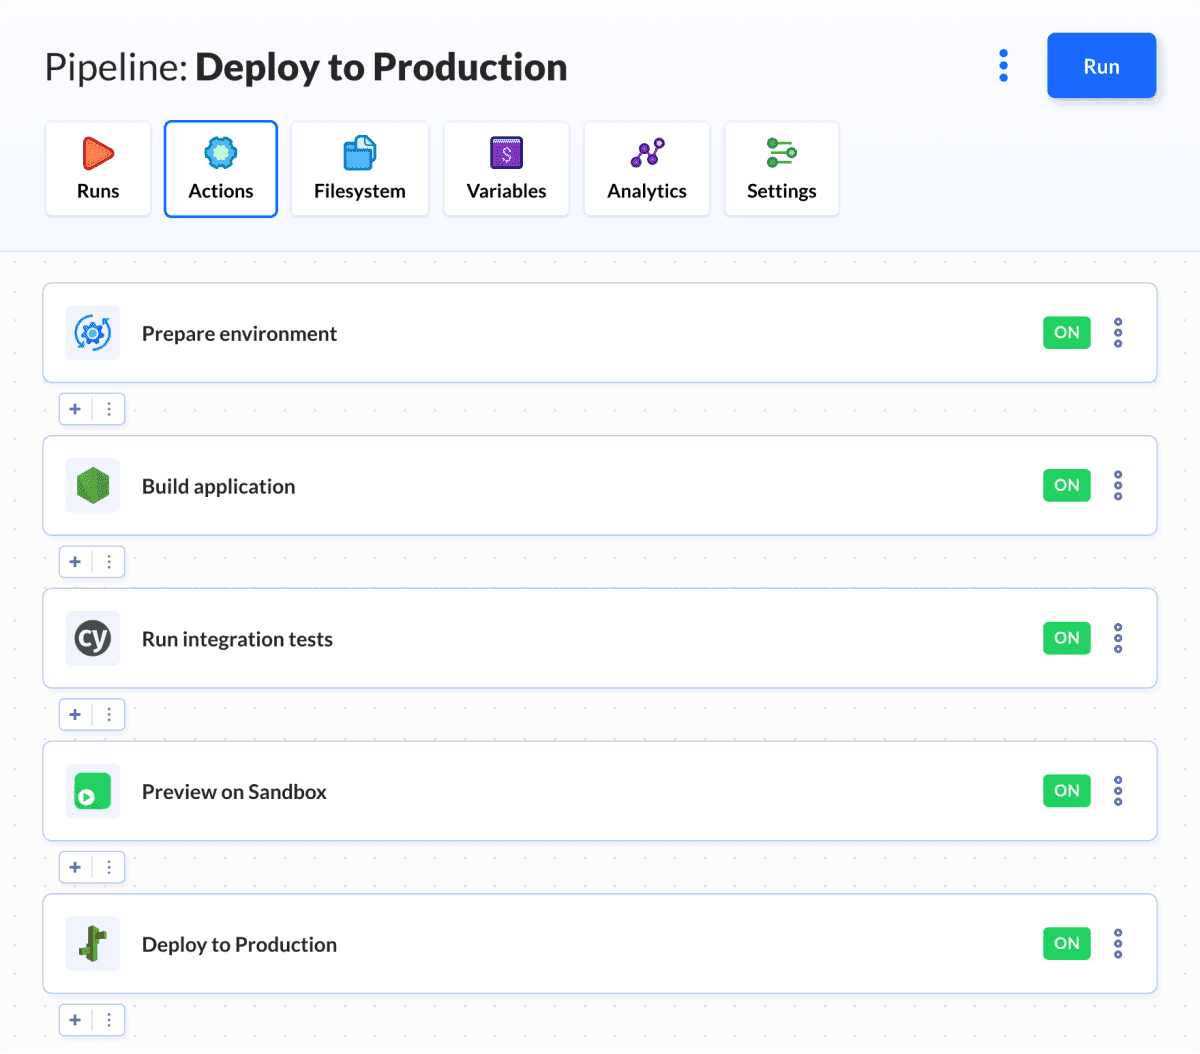 Screenshot of pipelines action builder: setup action, check for errors, build, run integration tests, deploy, notify and monitor